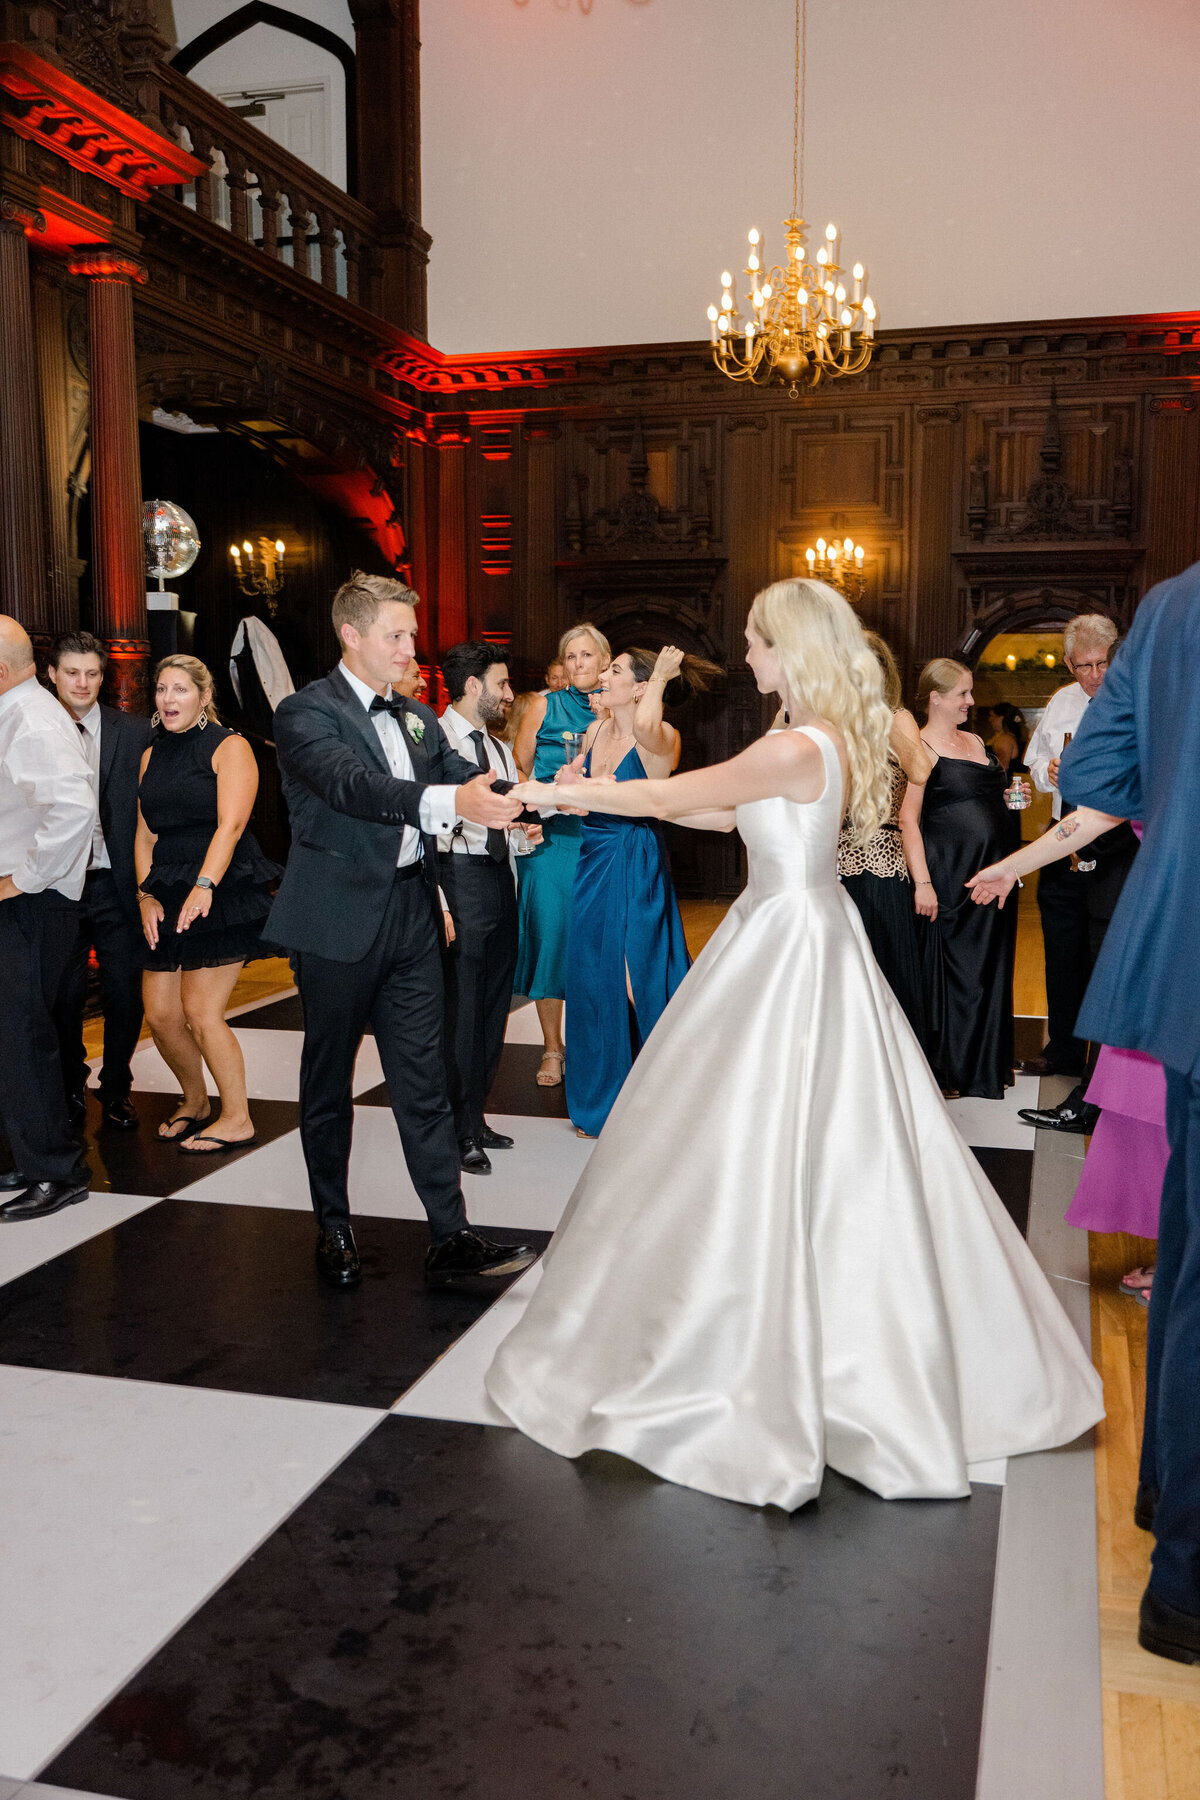 dancing-in-ballroom-at-branford-house-ct-jen-strunk-events